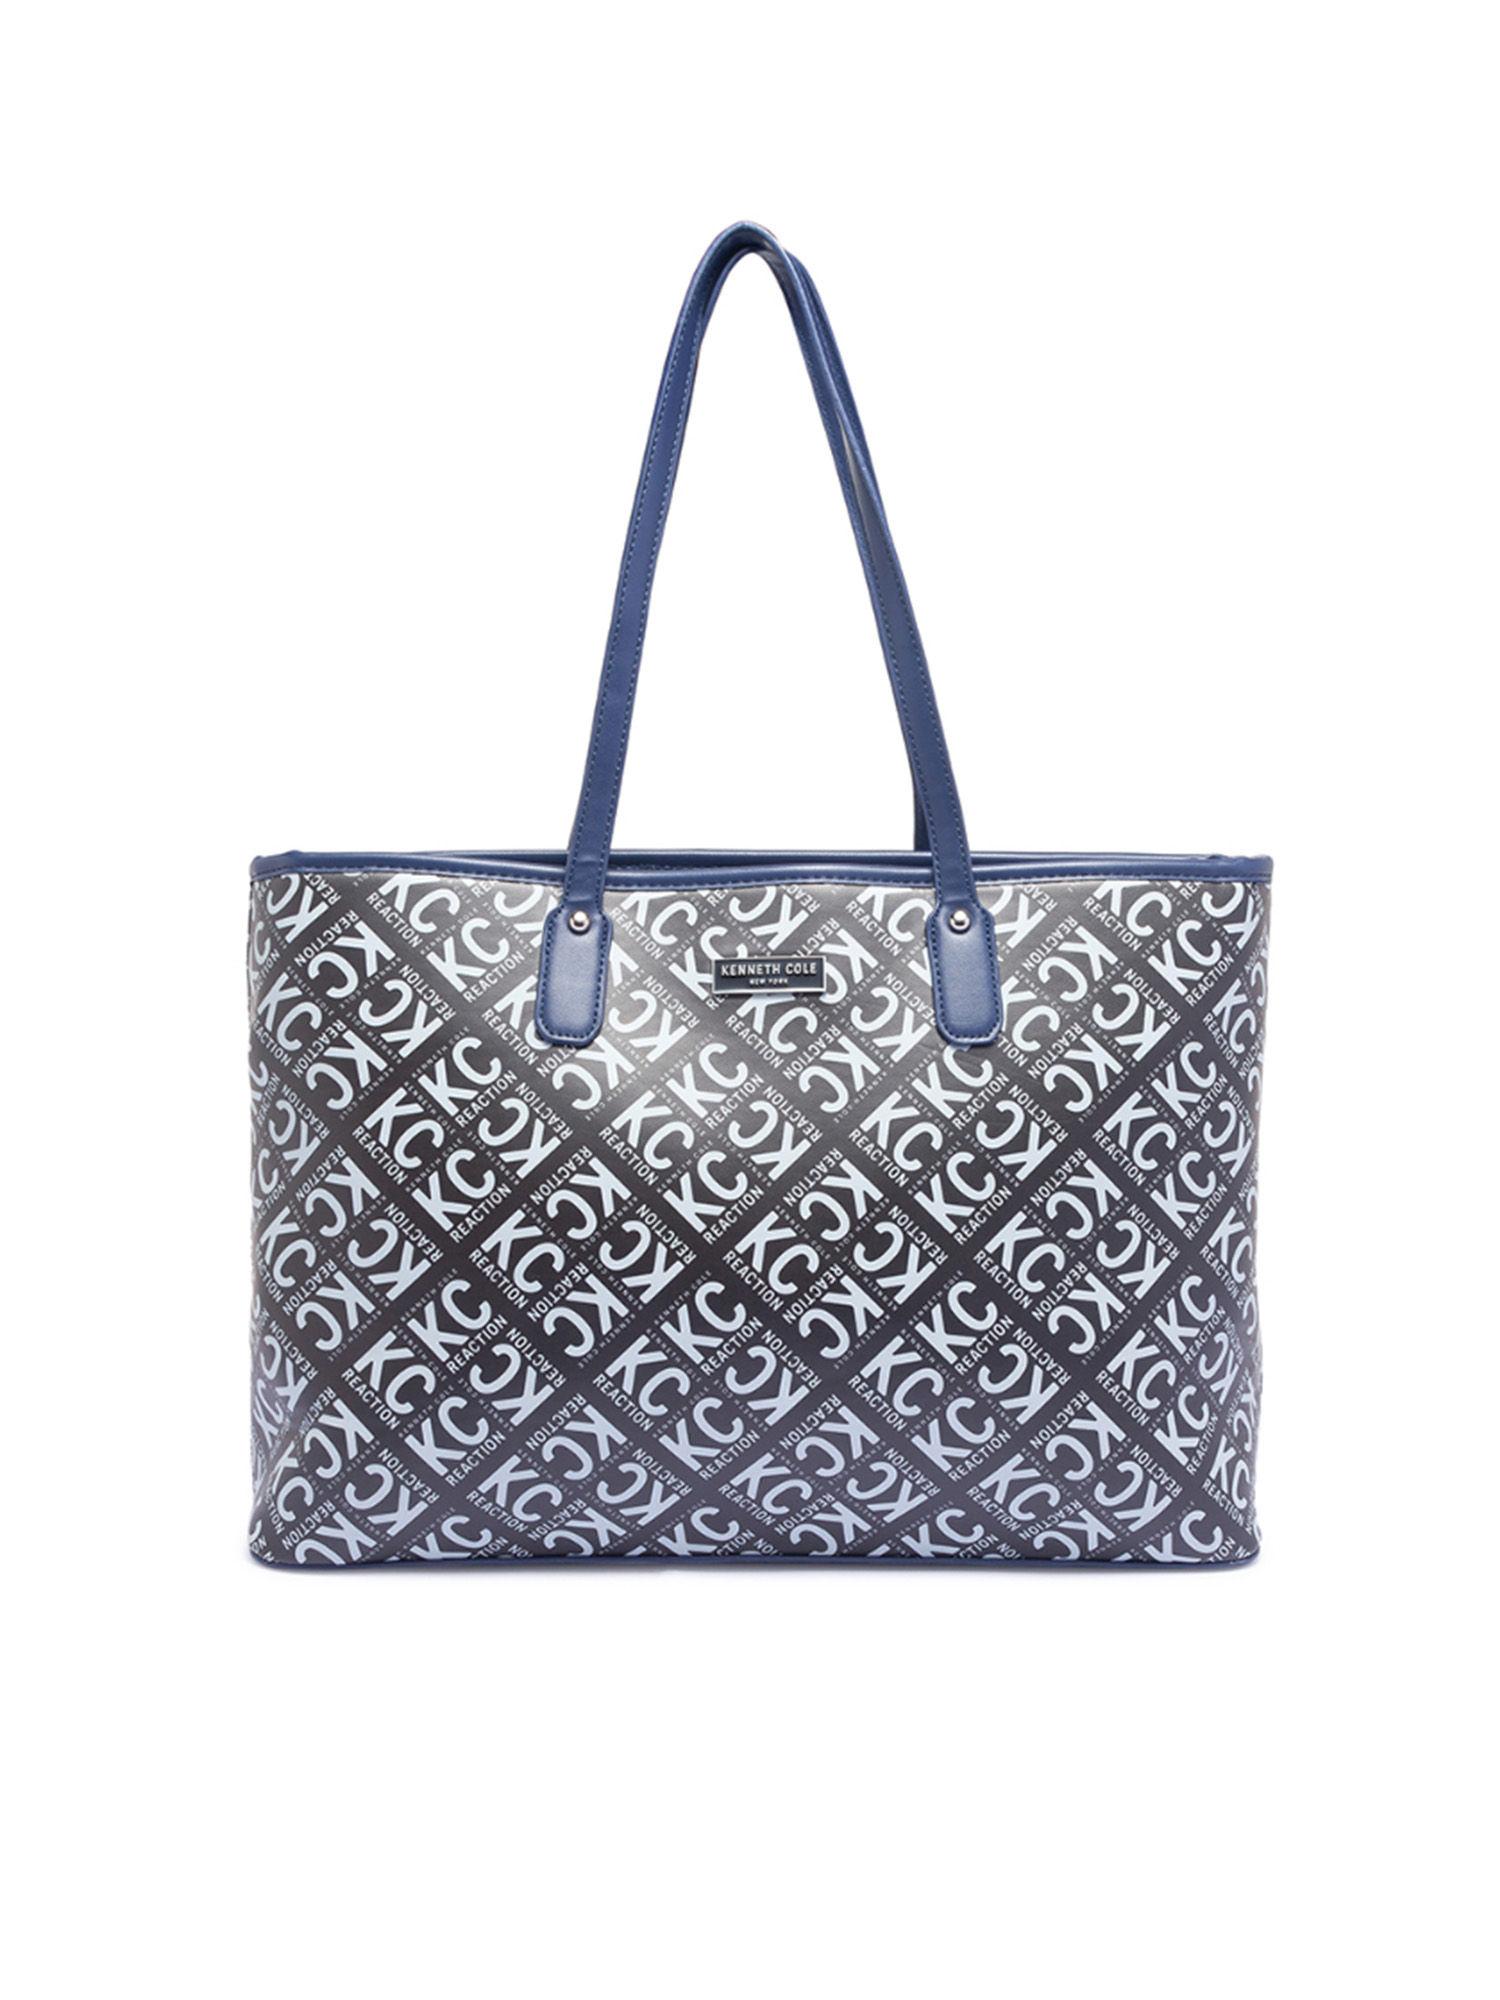 women's stylish navy casual tote bag